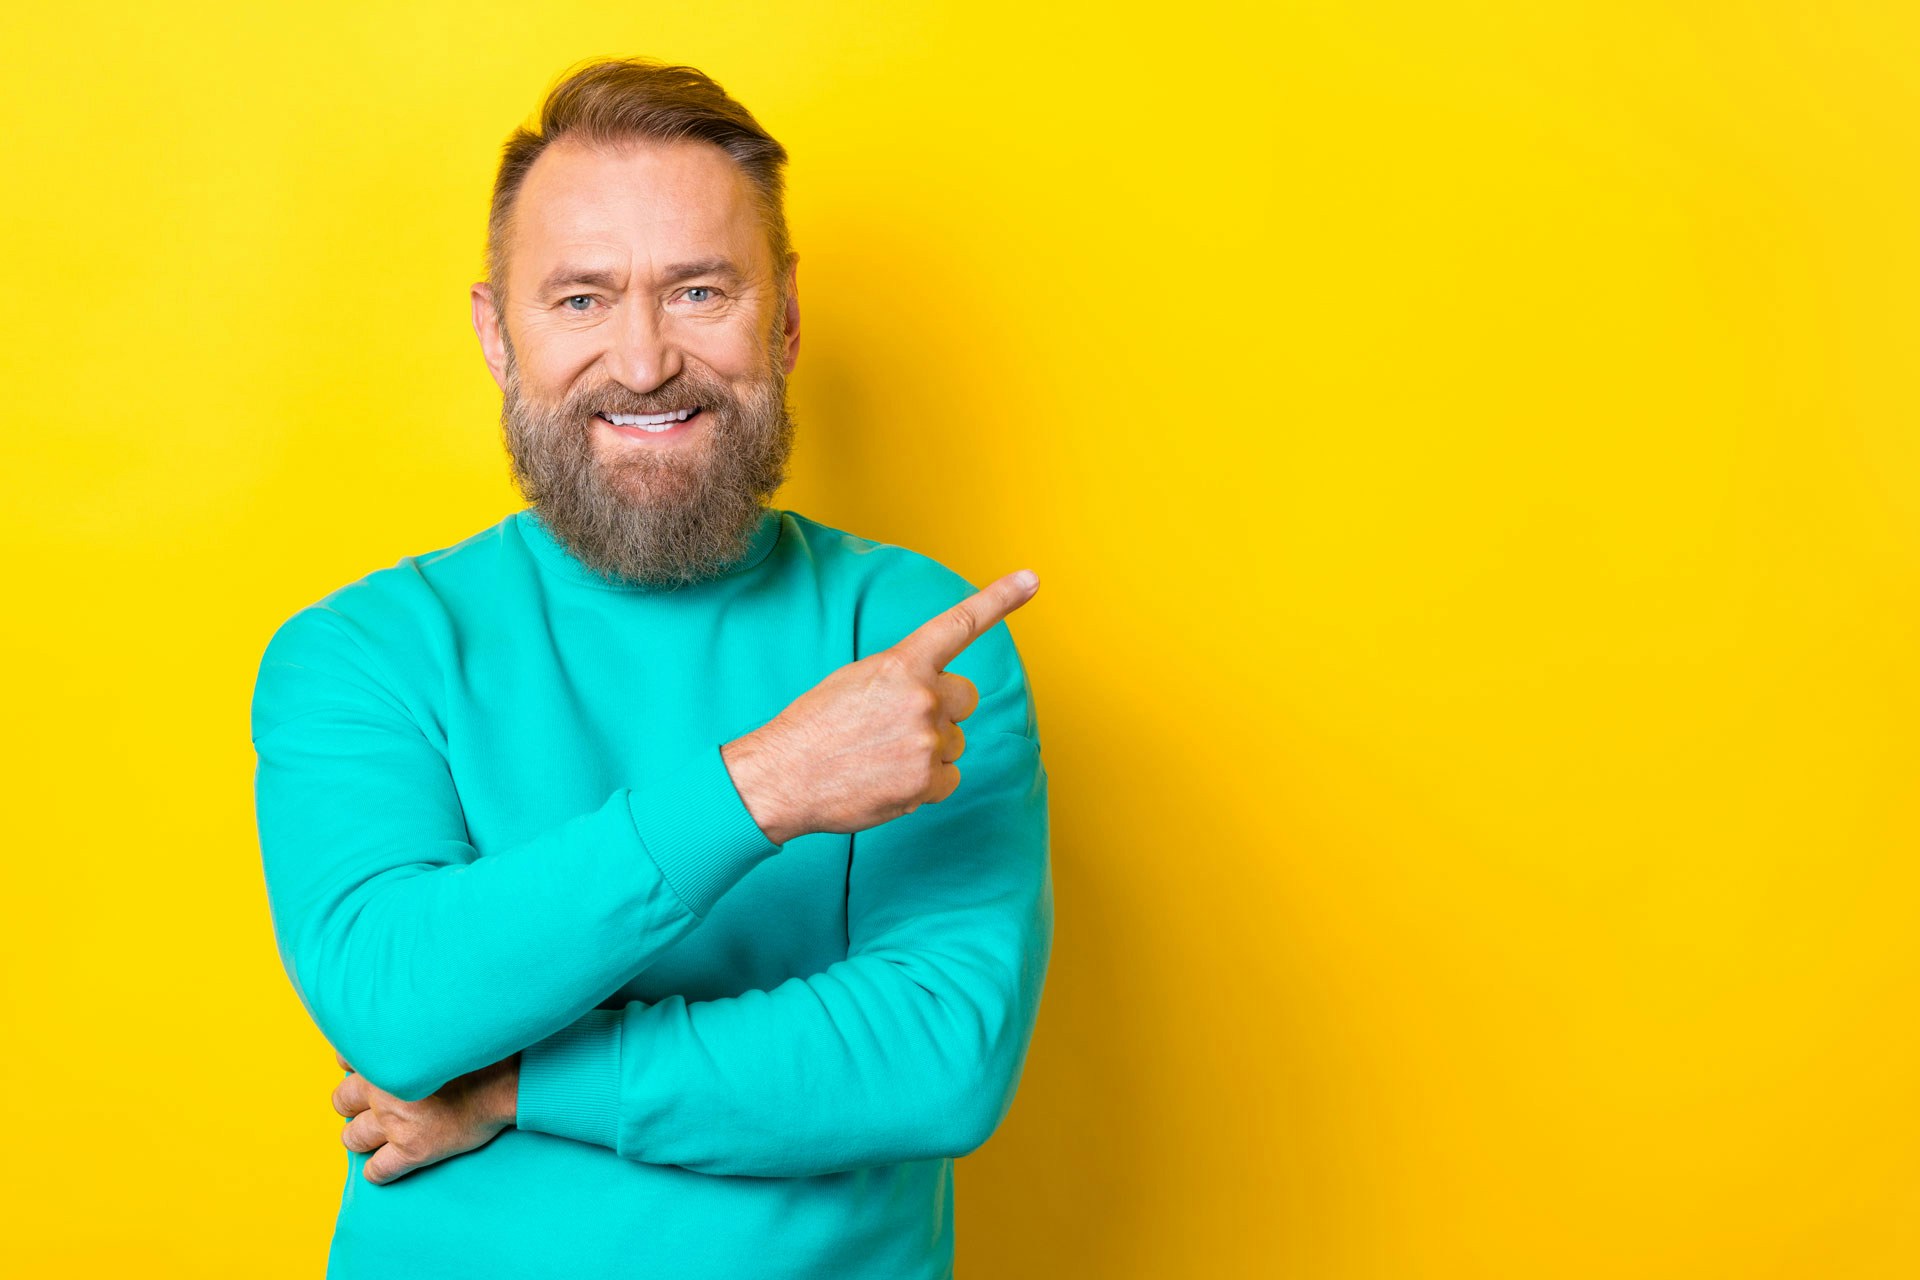 A man standing in front of a yellow background